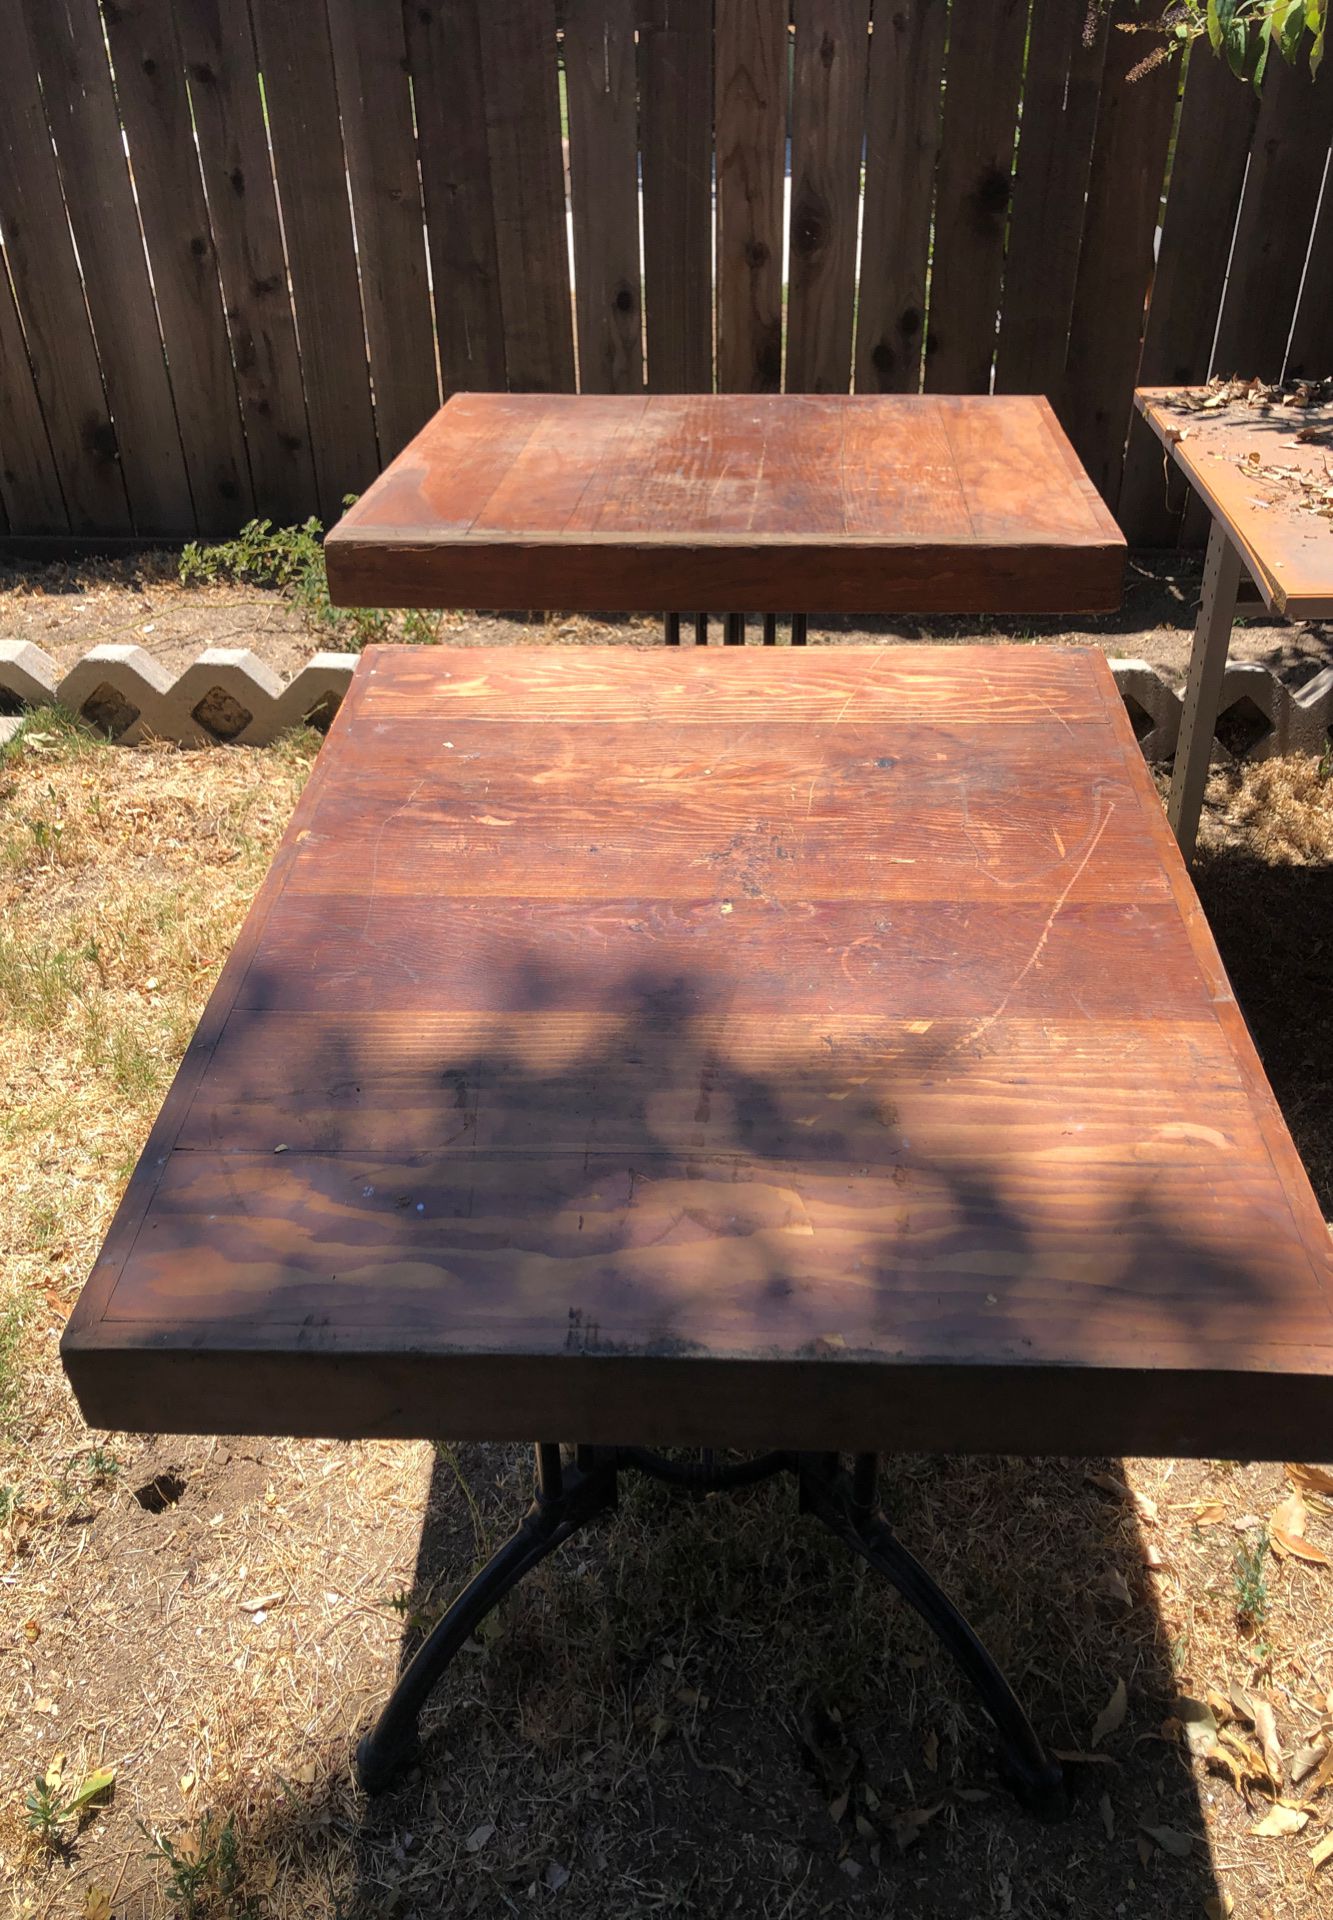 Wooden Restaurant tables with nice iron legs